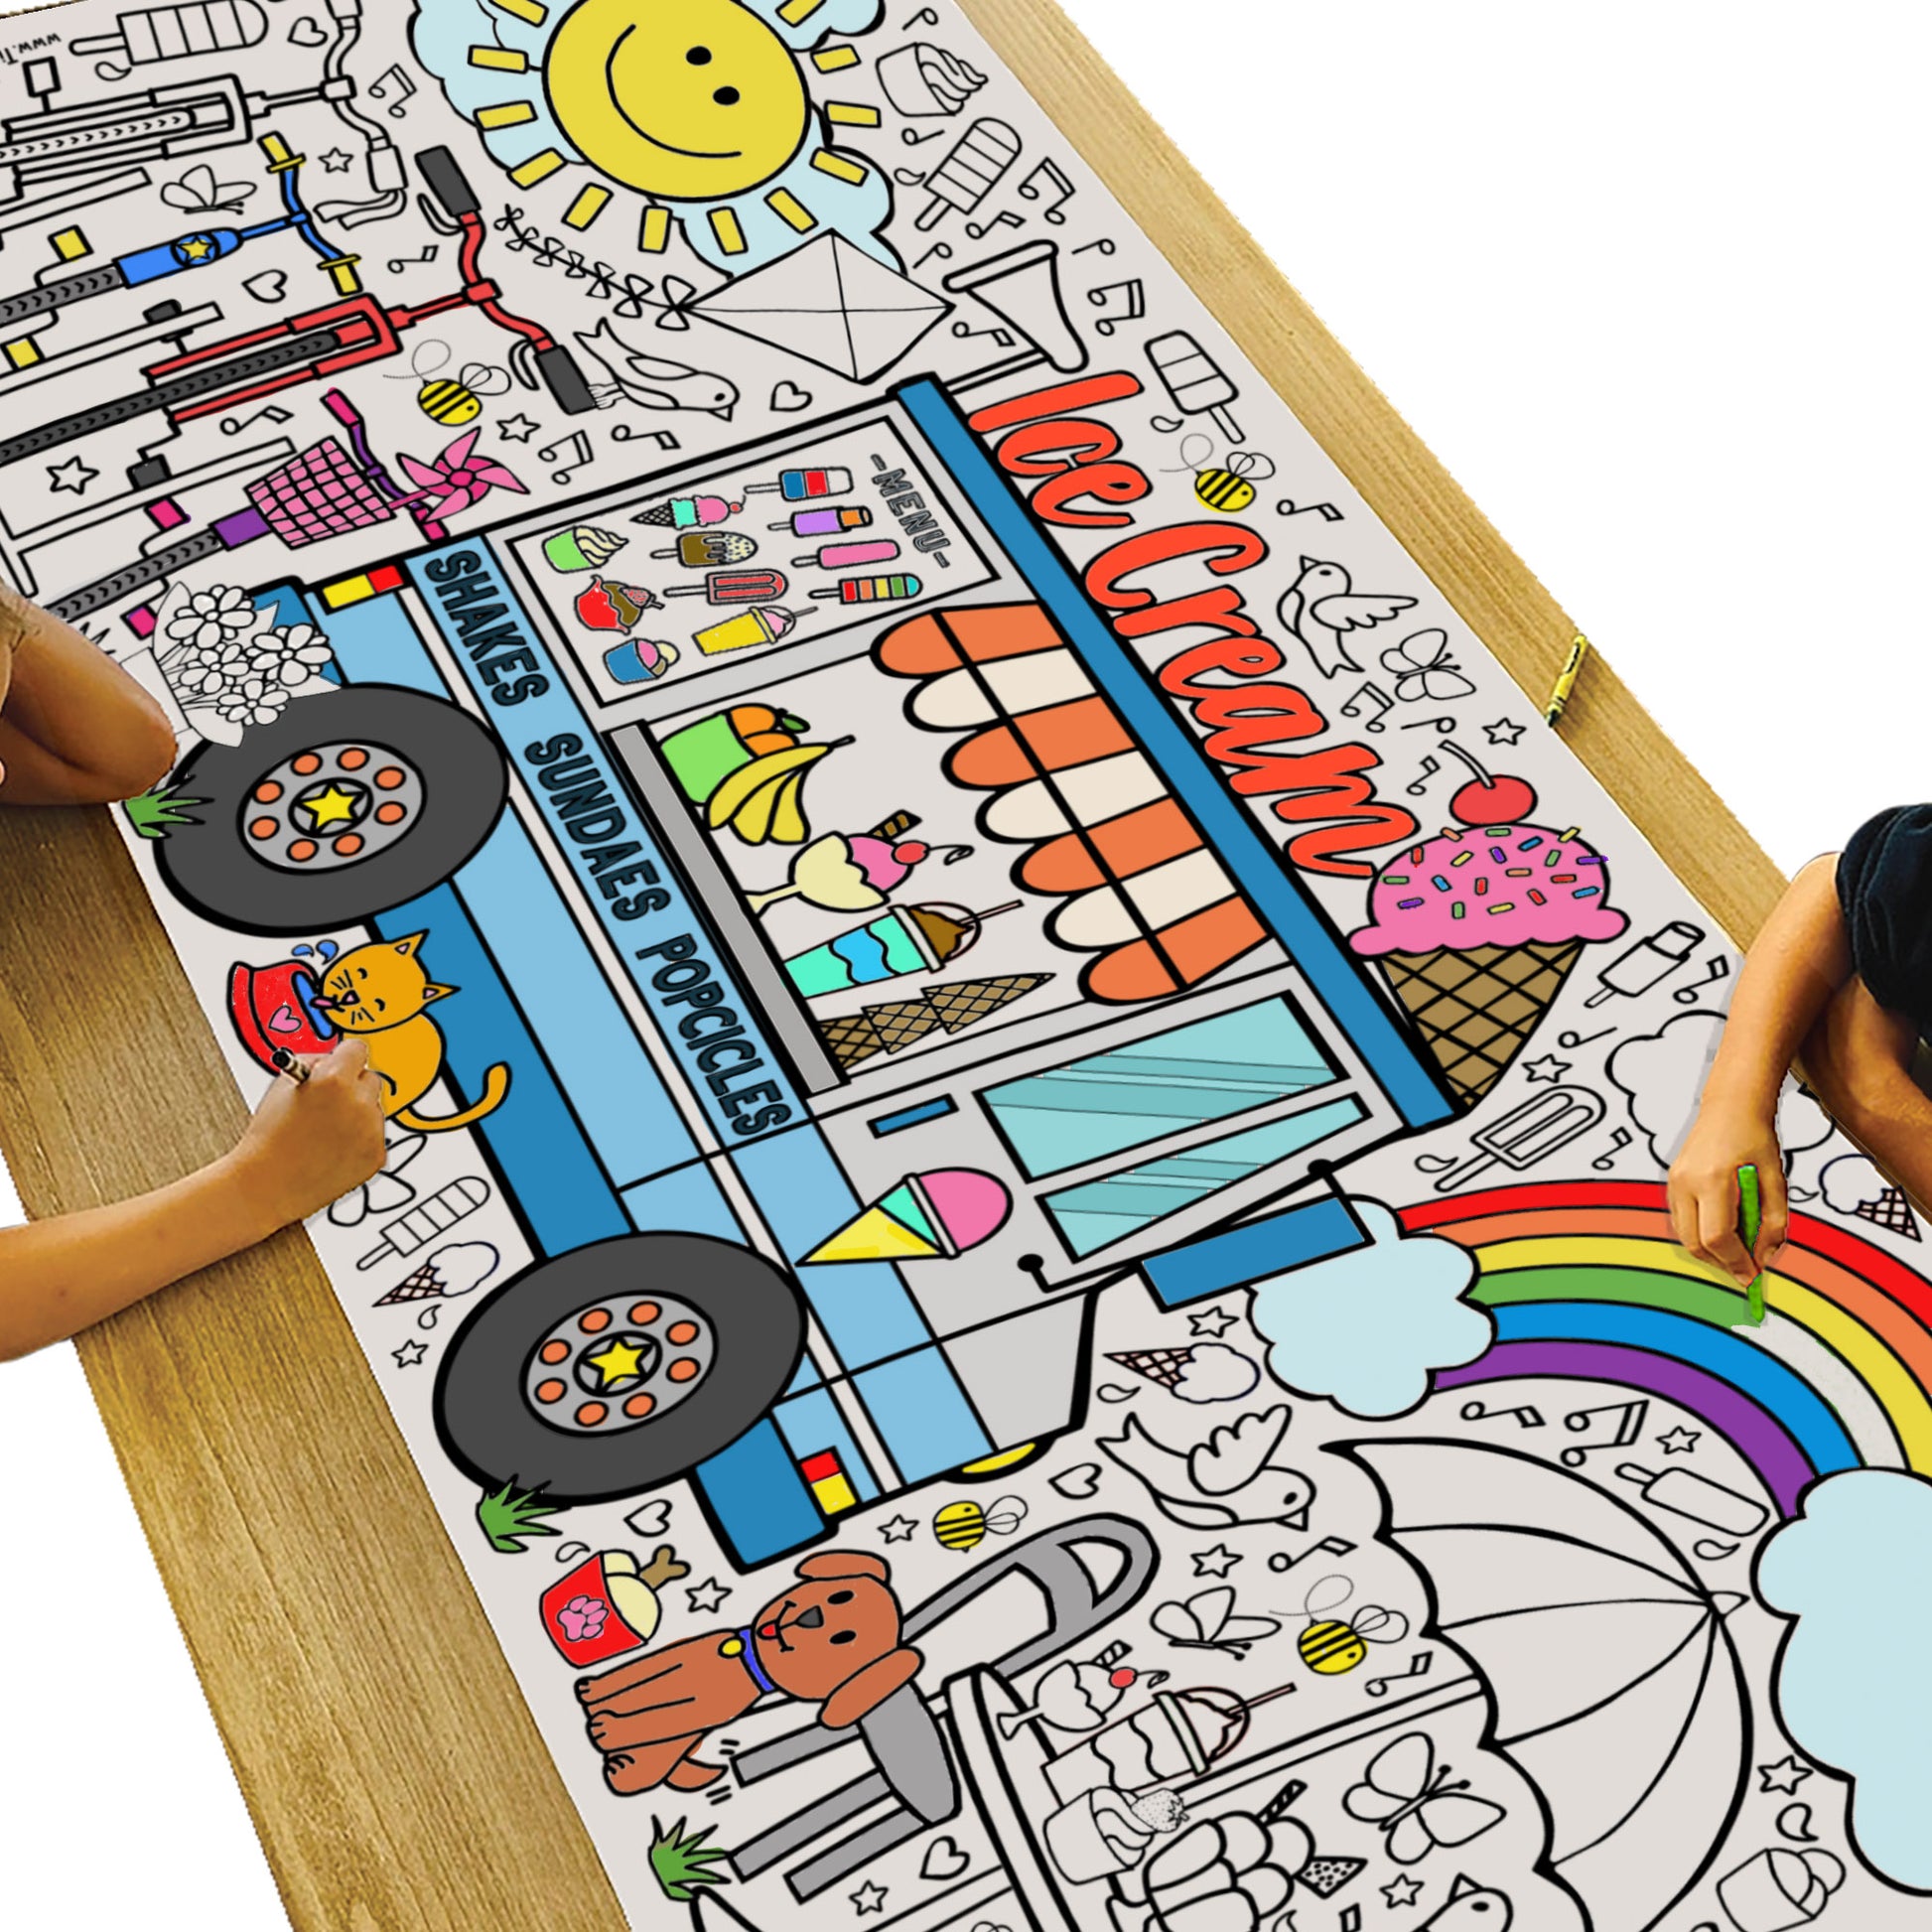 Extra Large Paper Coloring Tablecloth for Kids | Ultimate Fun Coloring  Table Cloth for Kids Birthday & More | USA Made Jumbo Coloring Poster 